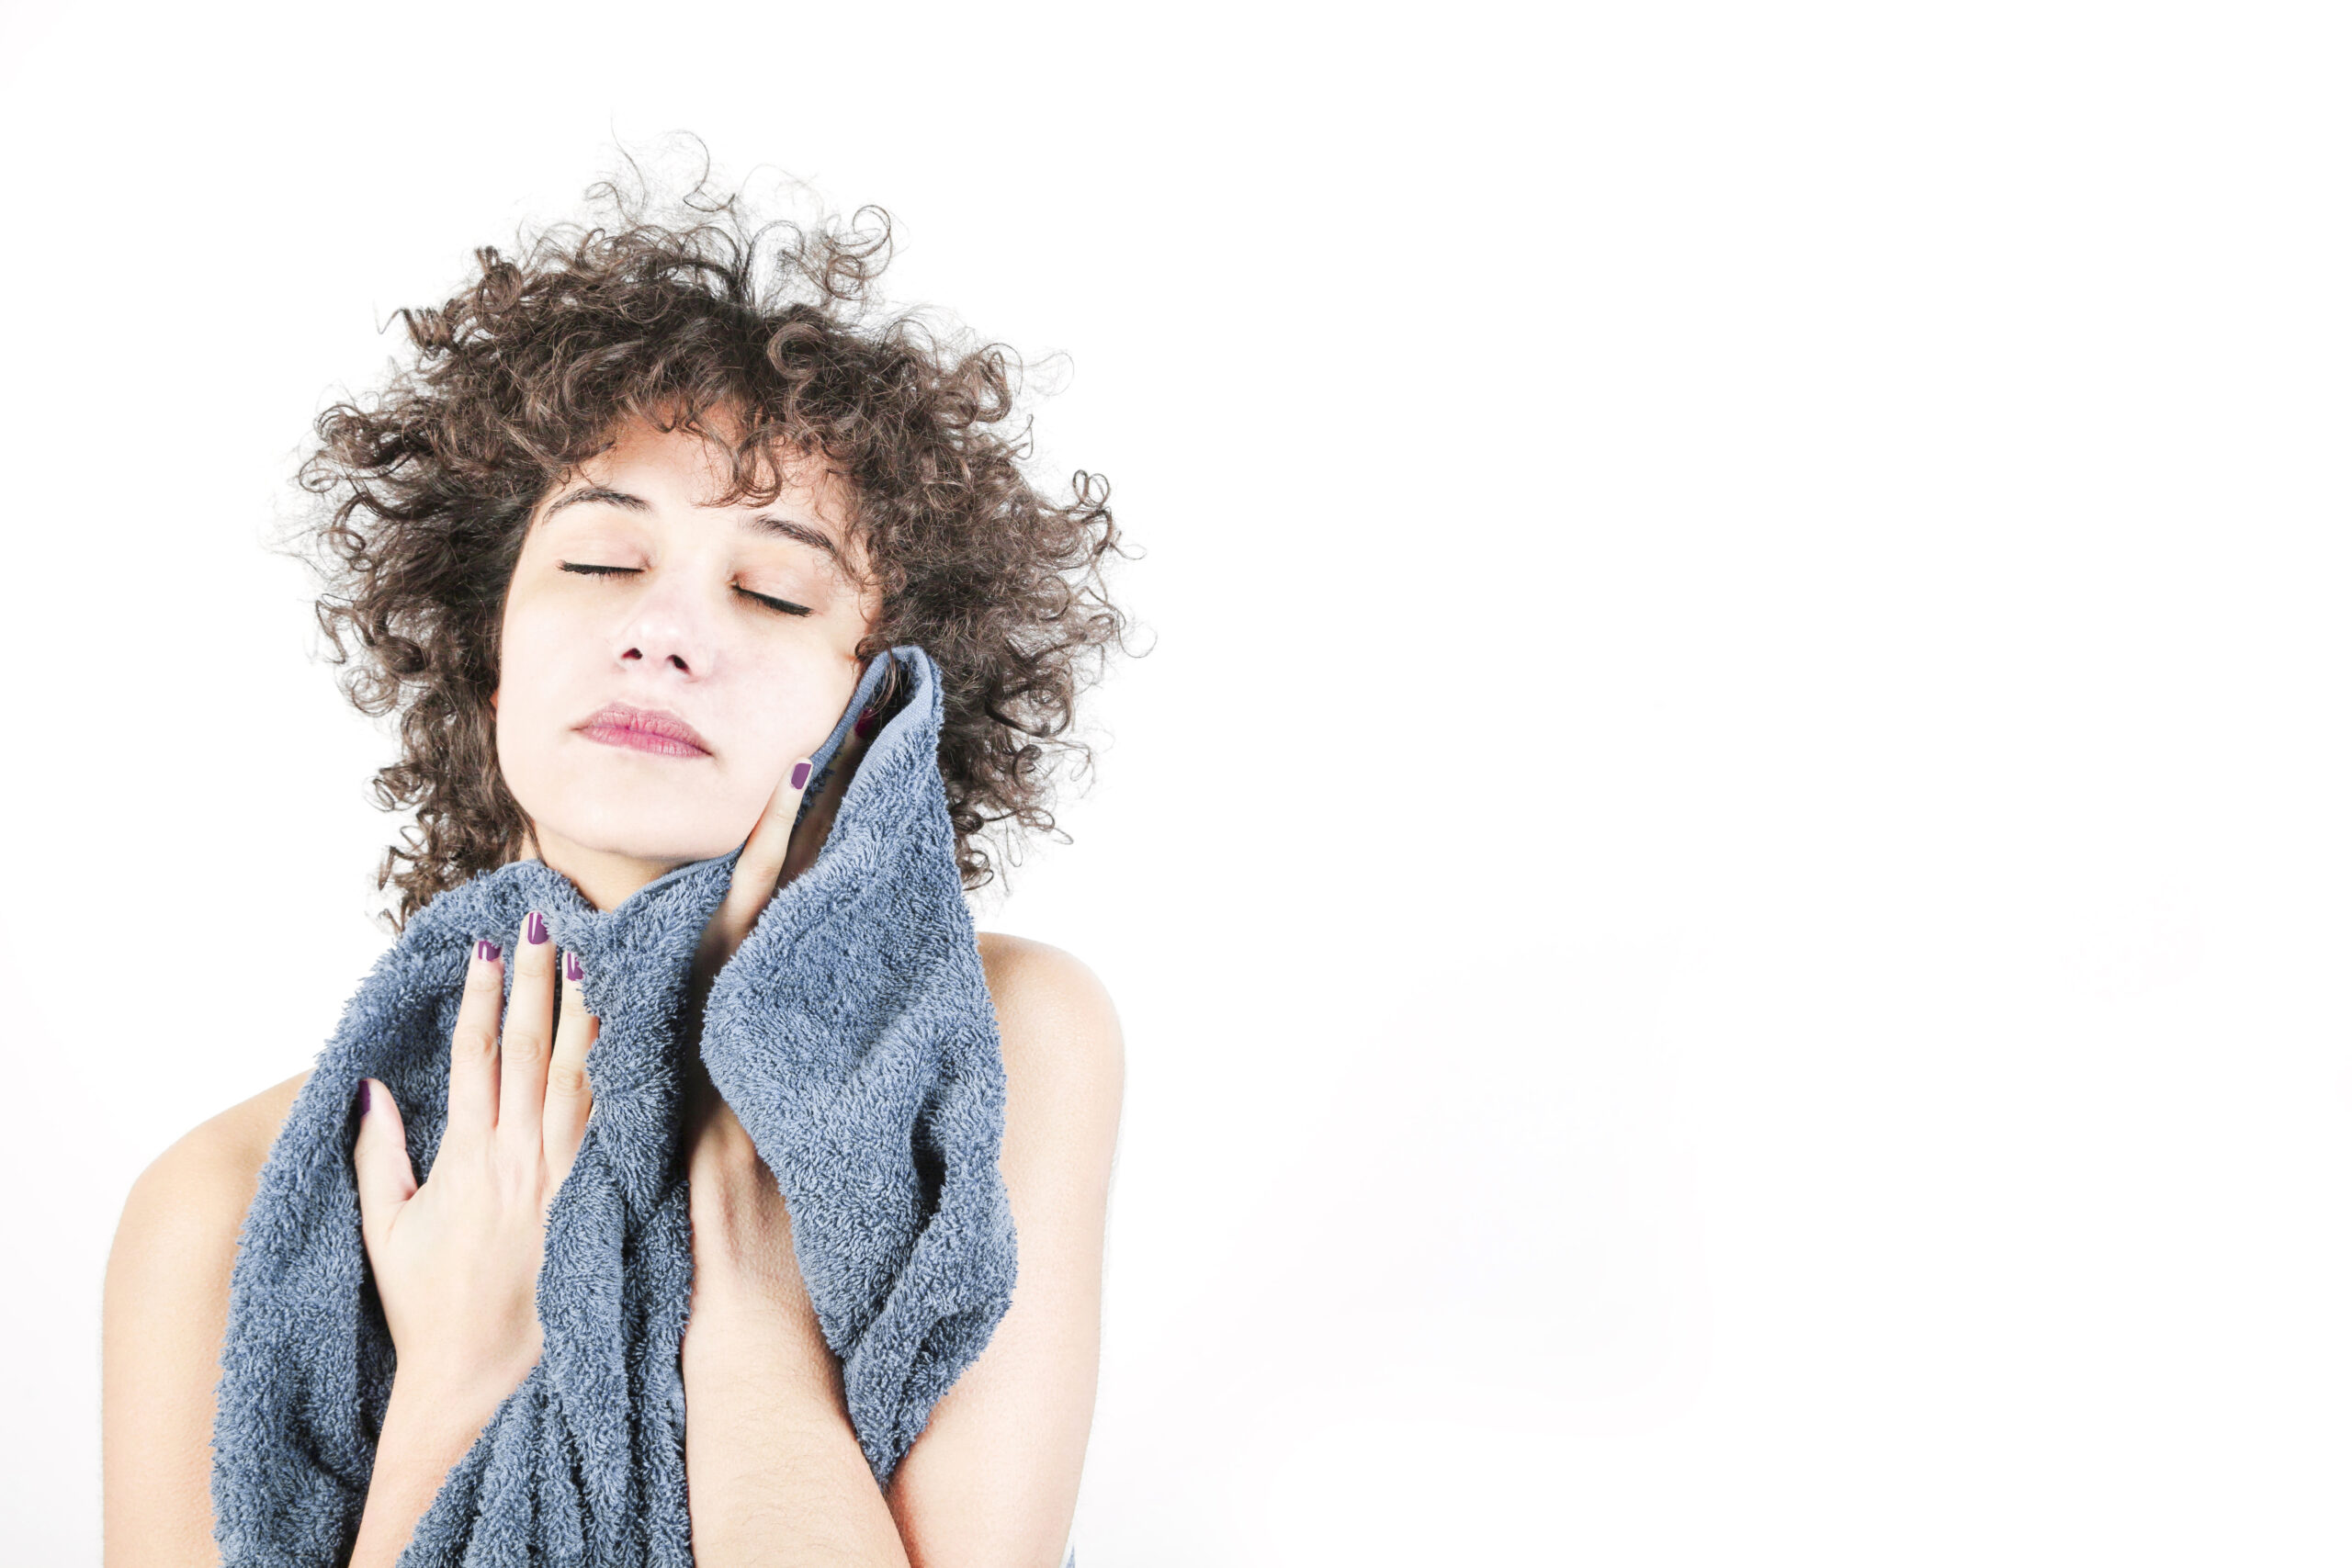 woman-wiping-herself-with-towel-against-white-background